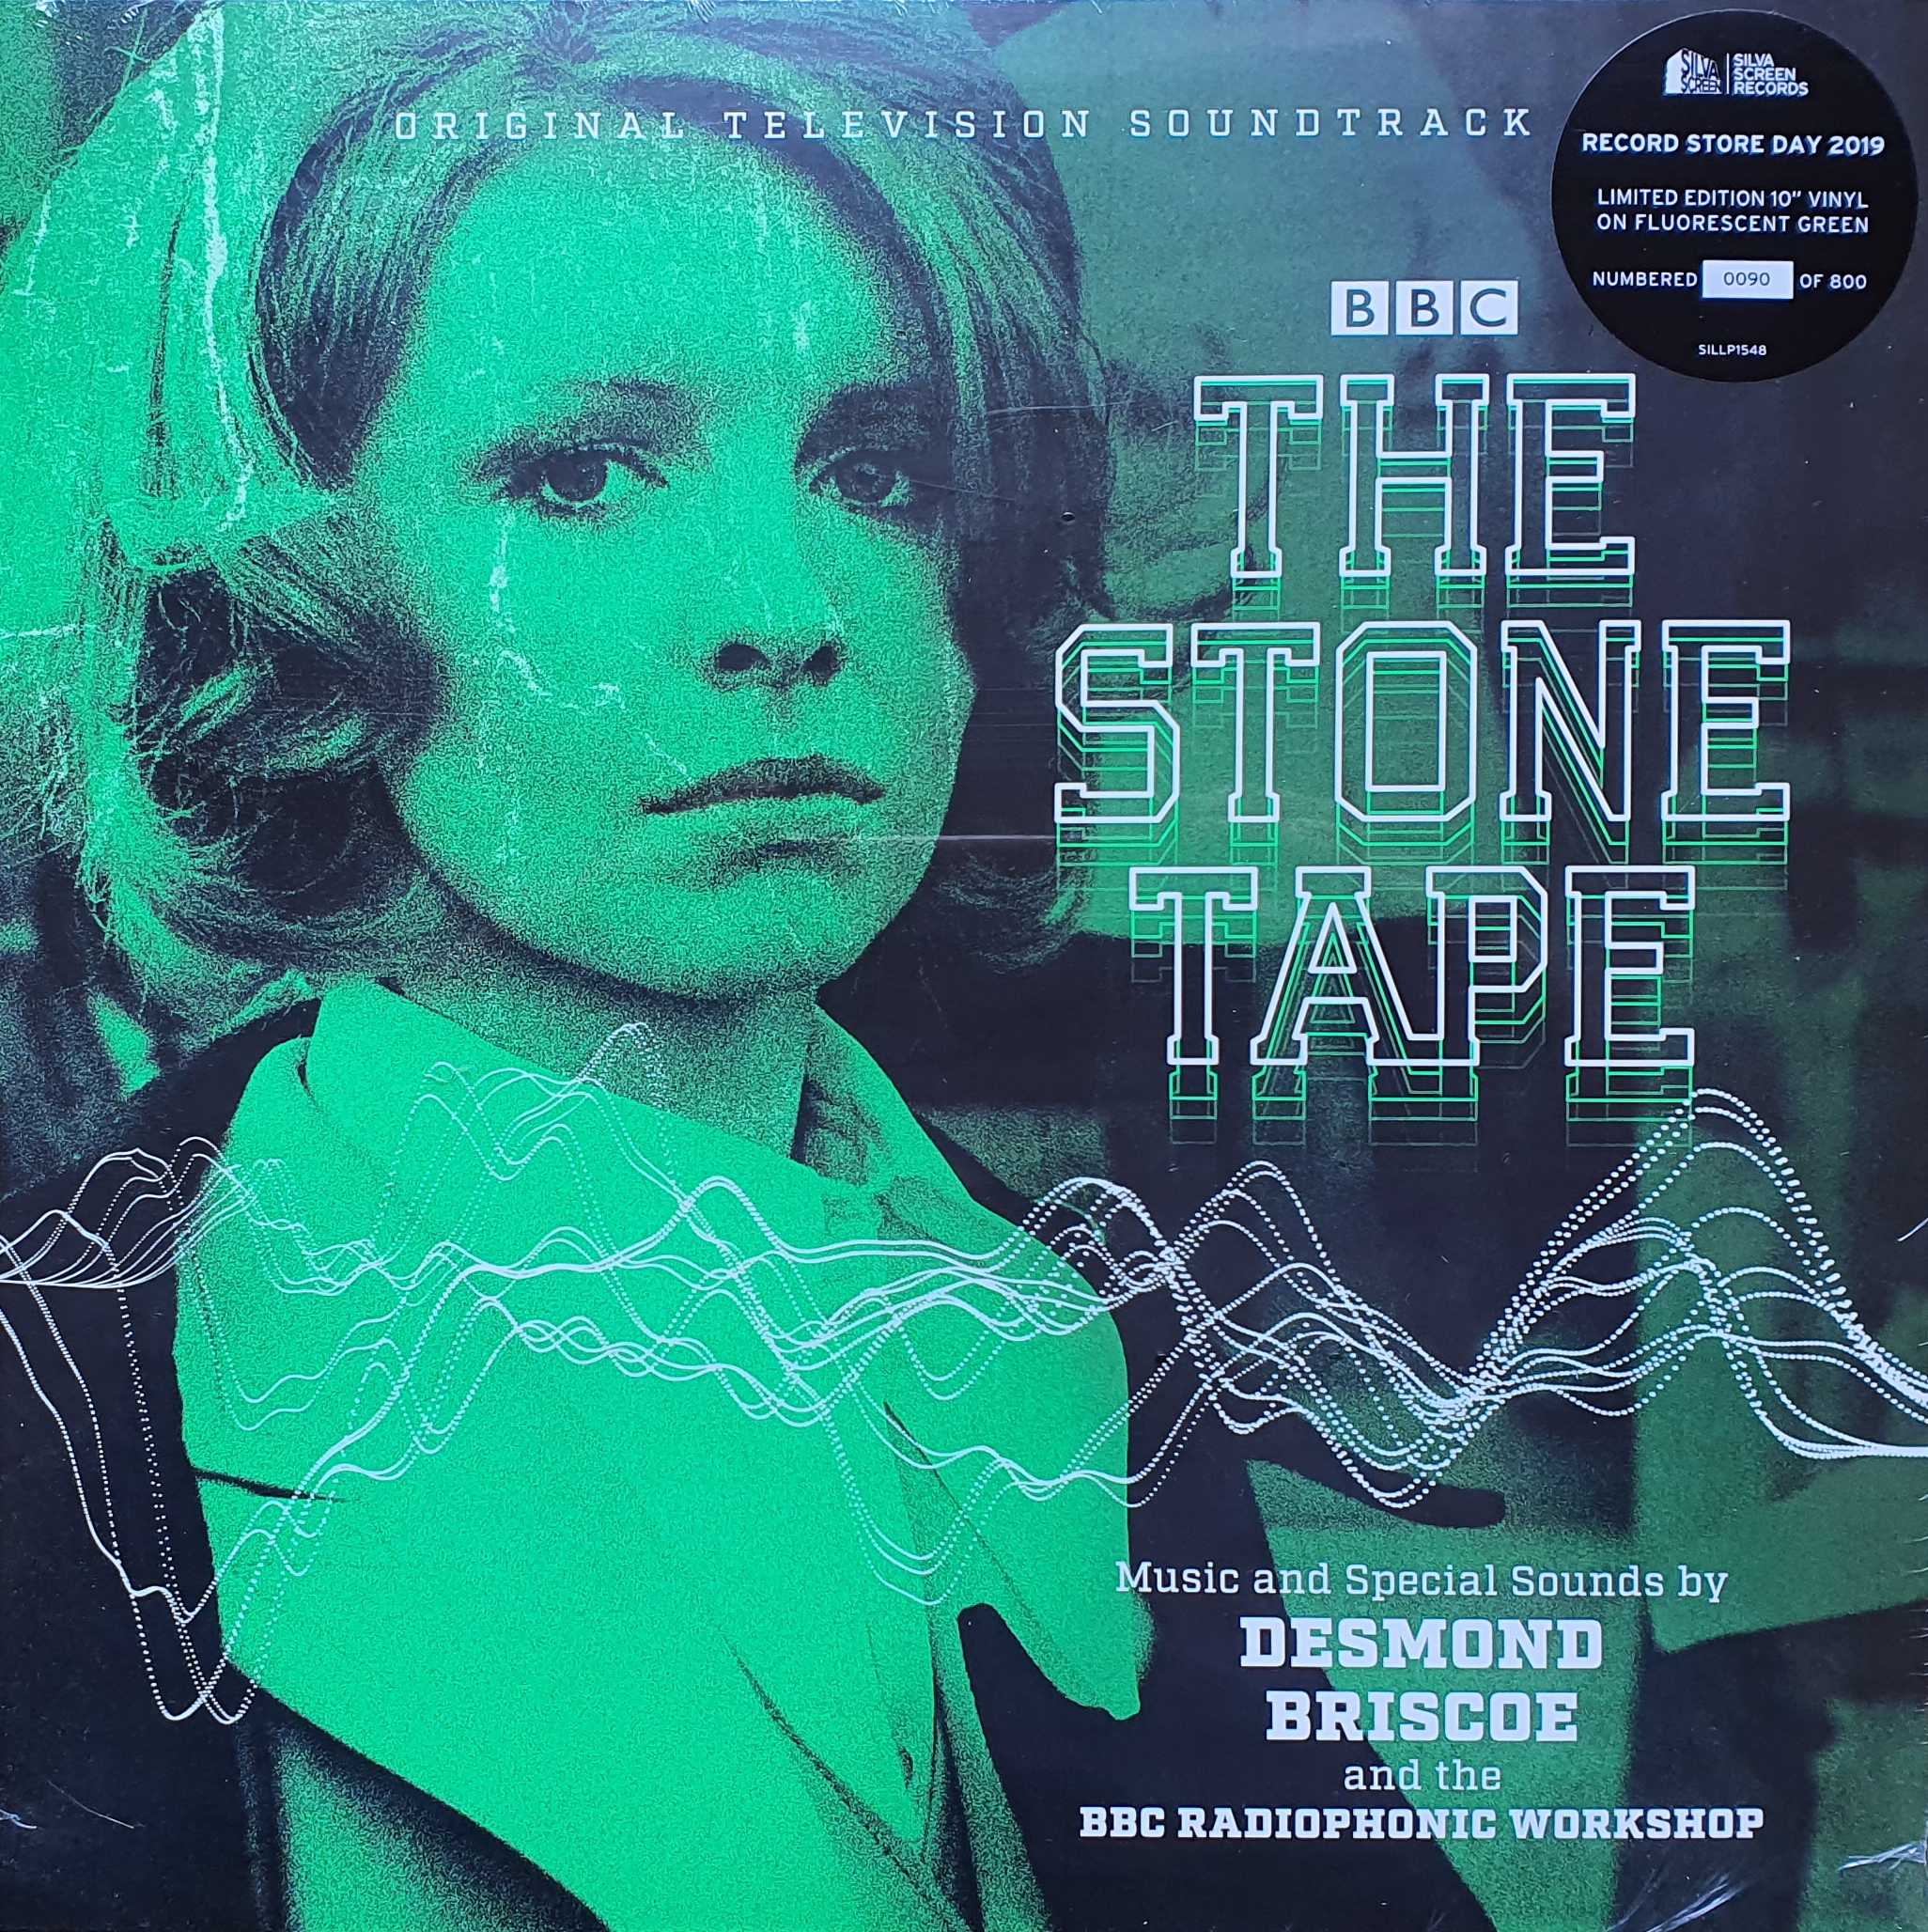 Picture of SILLP 1548 The Stone Tape (Record Store Day 2019 fluorescent green vinyl) by artist Desmond Briscoe and the BBC Radiophonic Workshop from the BBC 10inches - Records and Tapes library